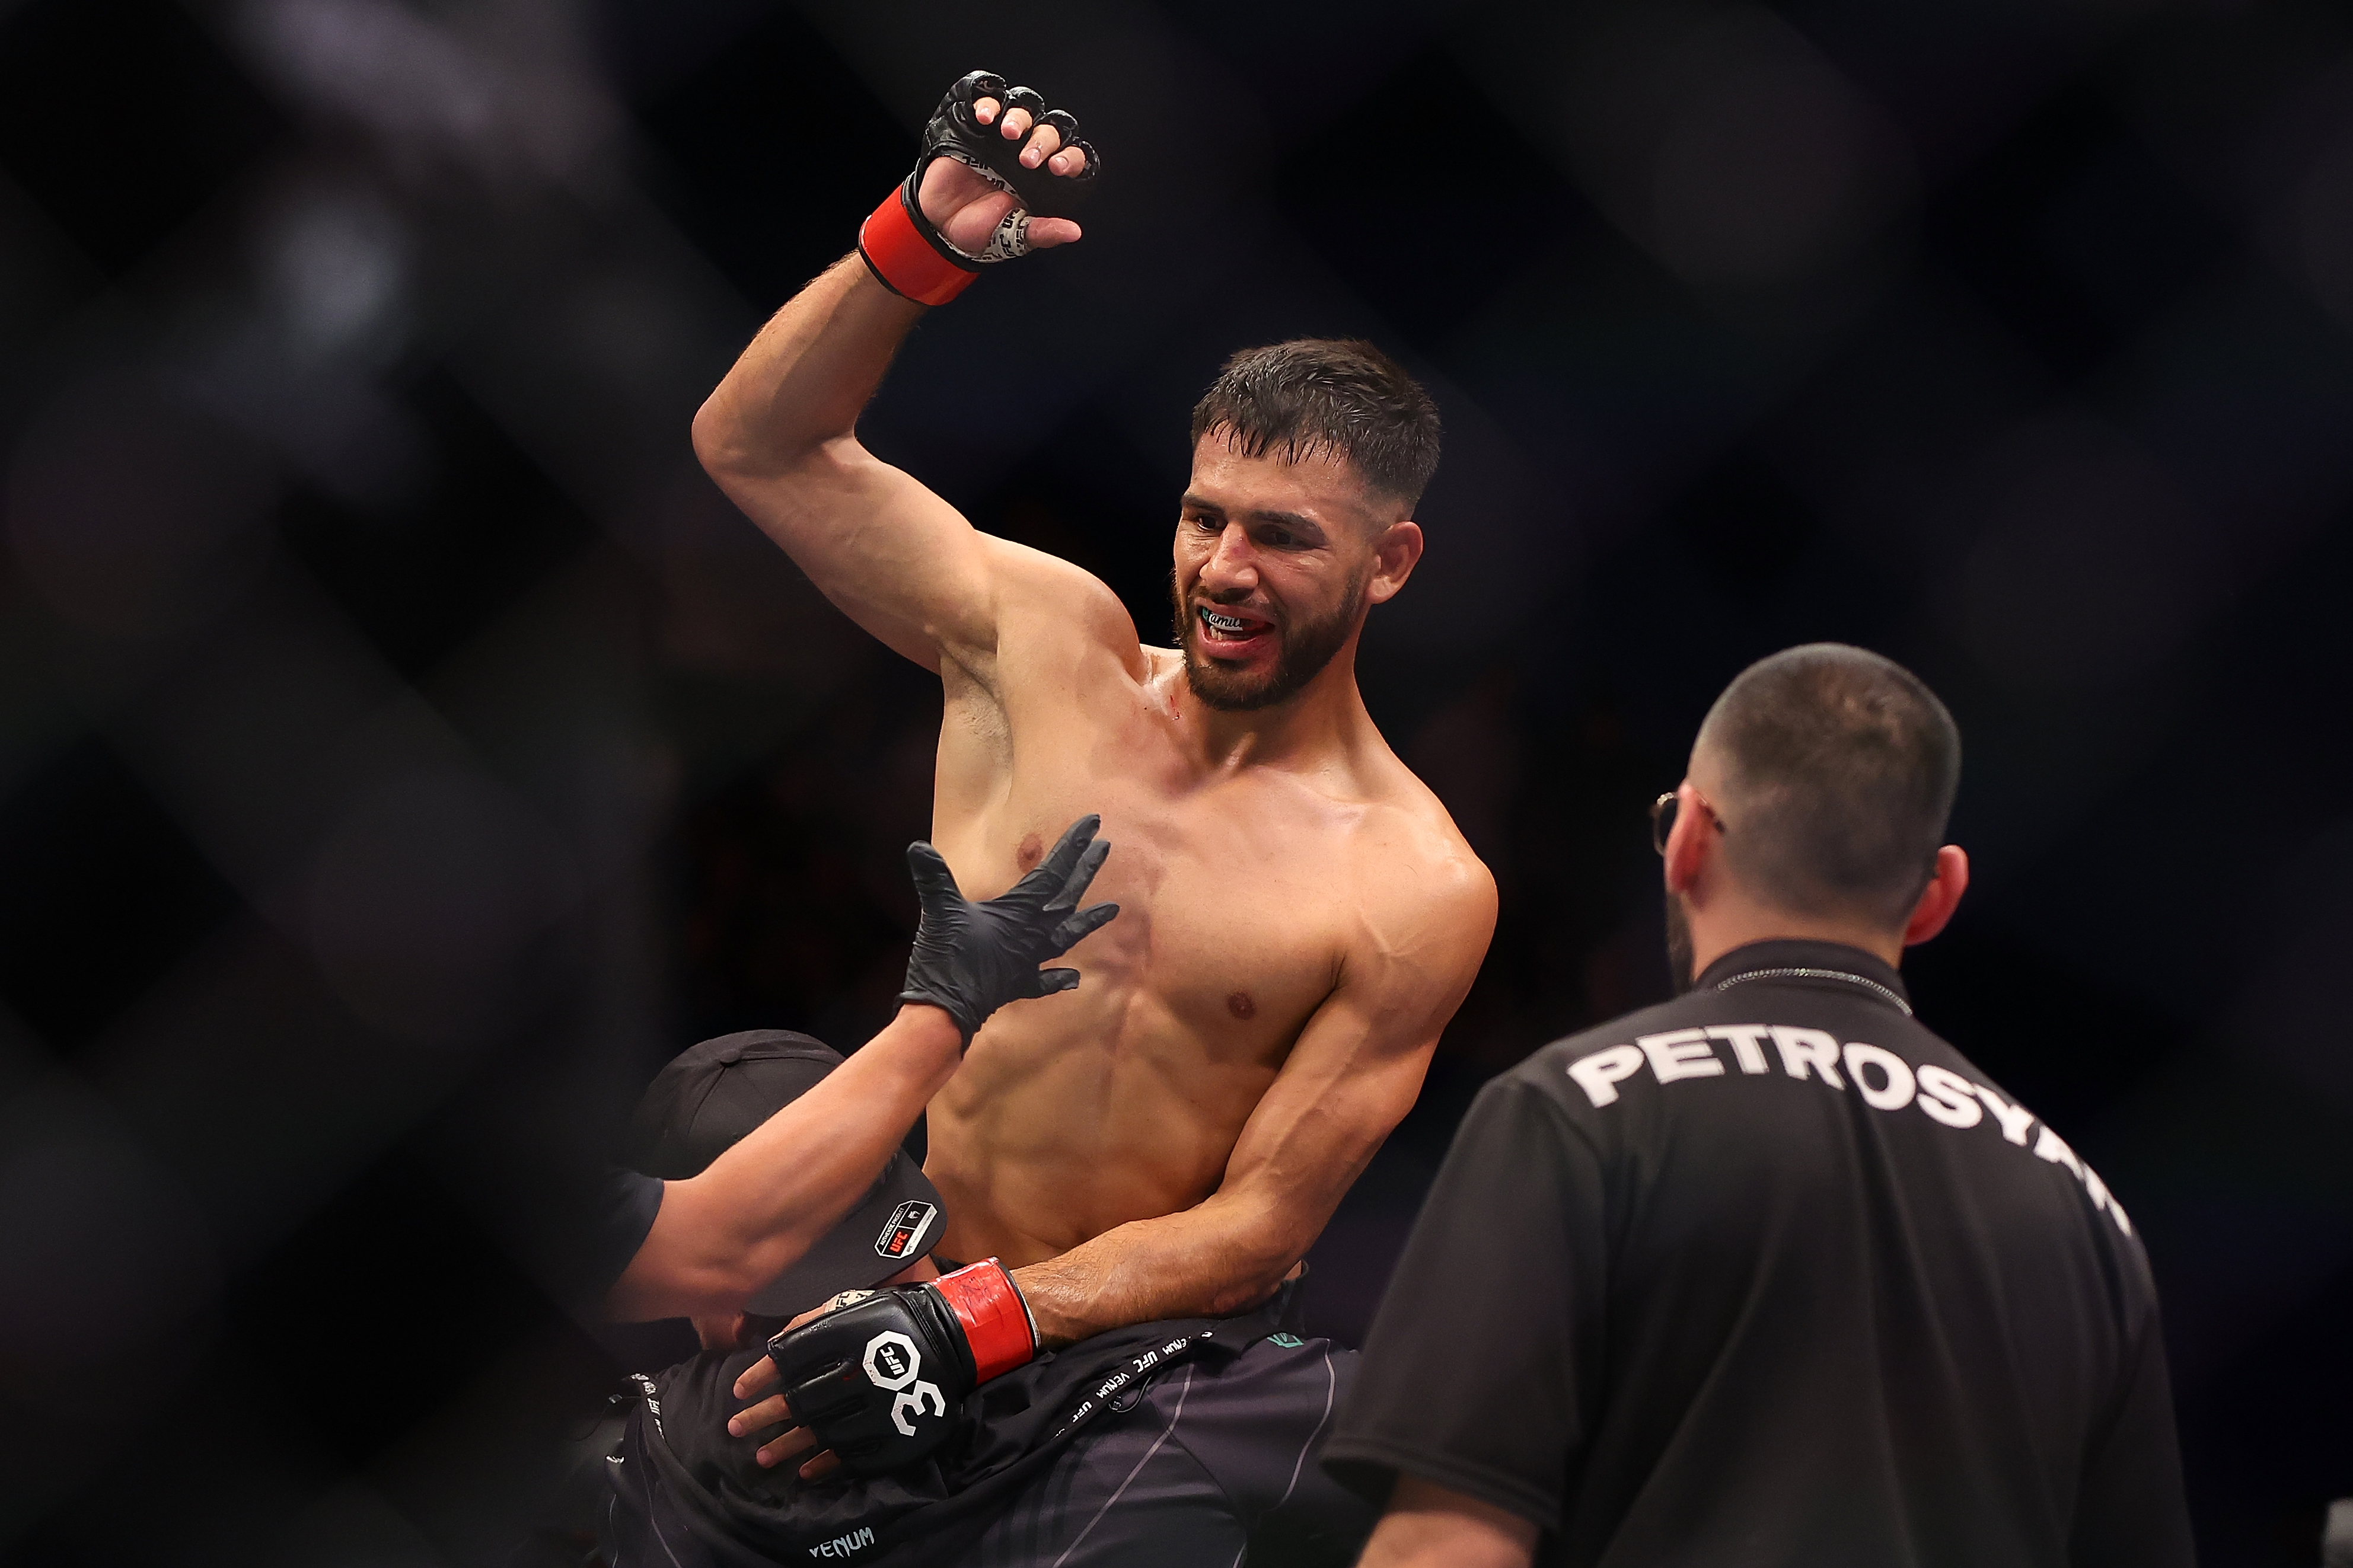 Yair Rodriguez won the interim UFC featherweight title with a submission win over Josh Emmett at UFC 284